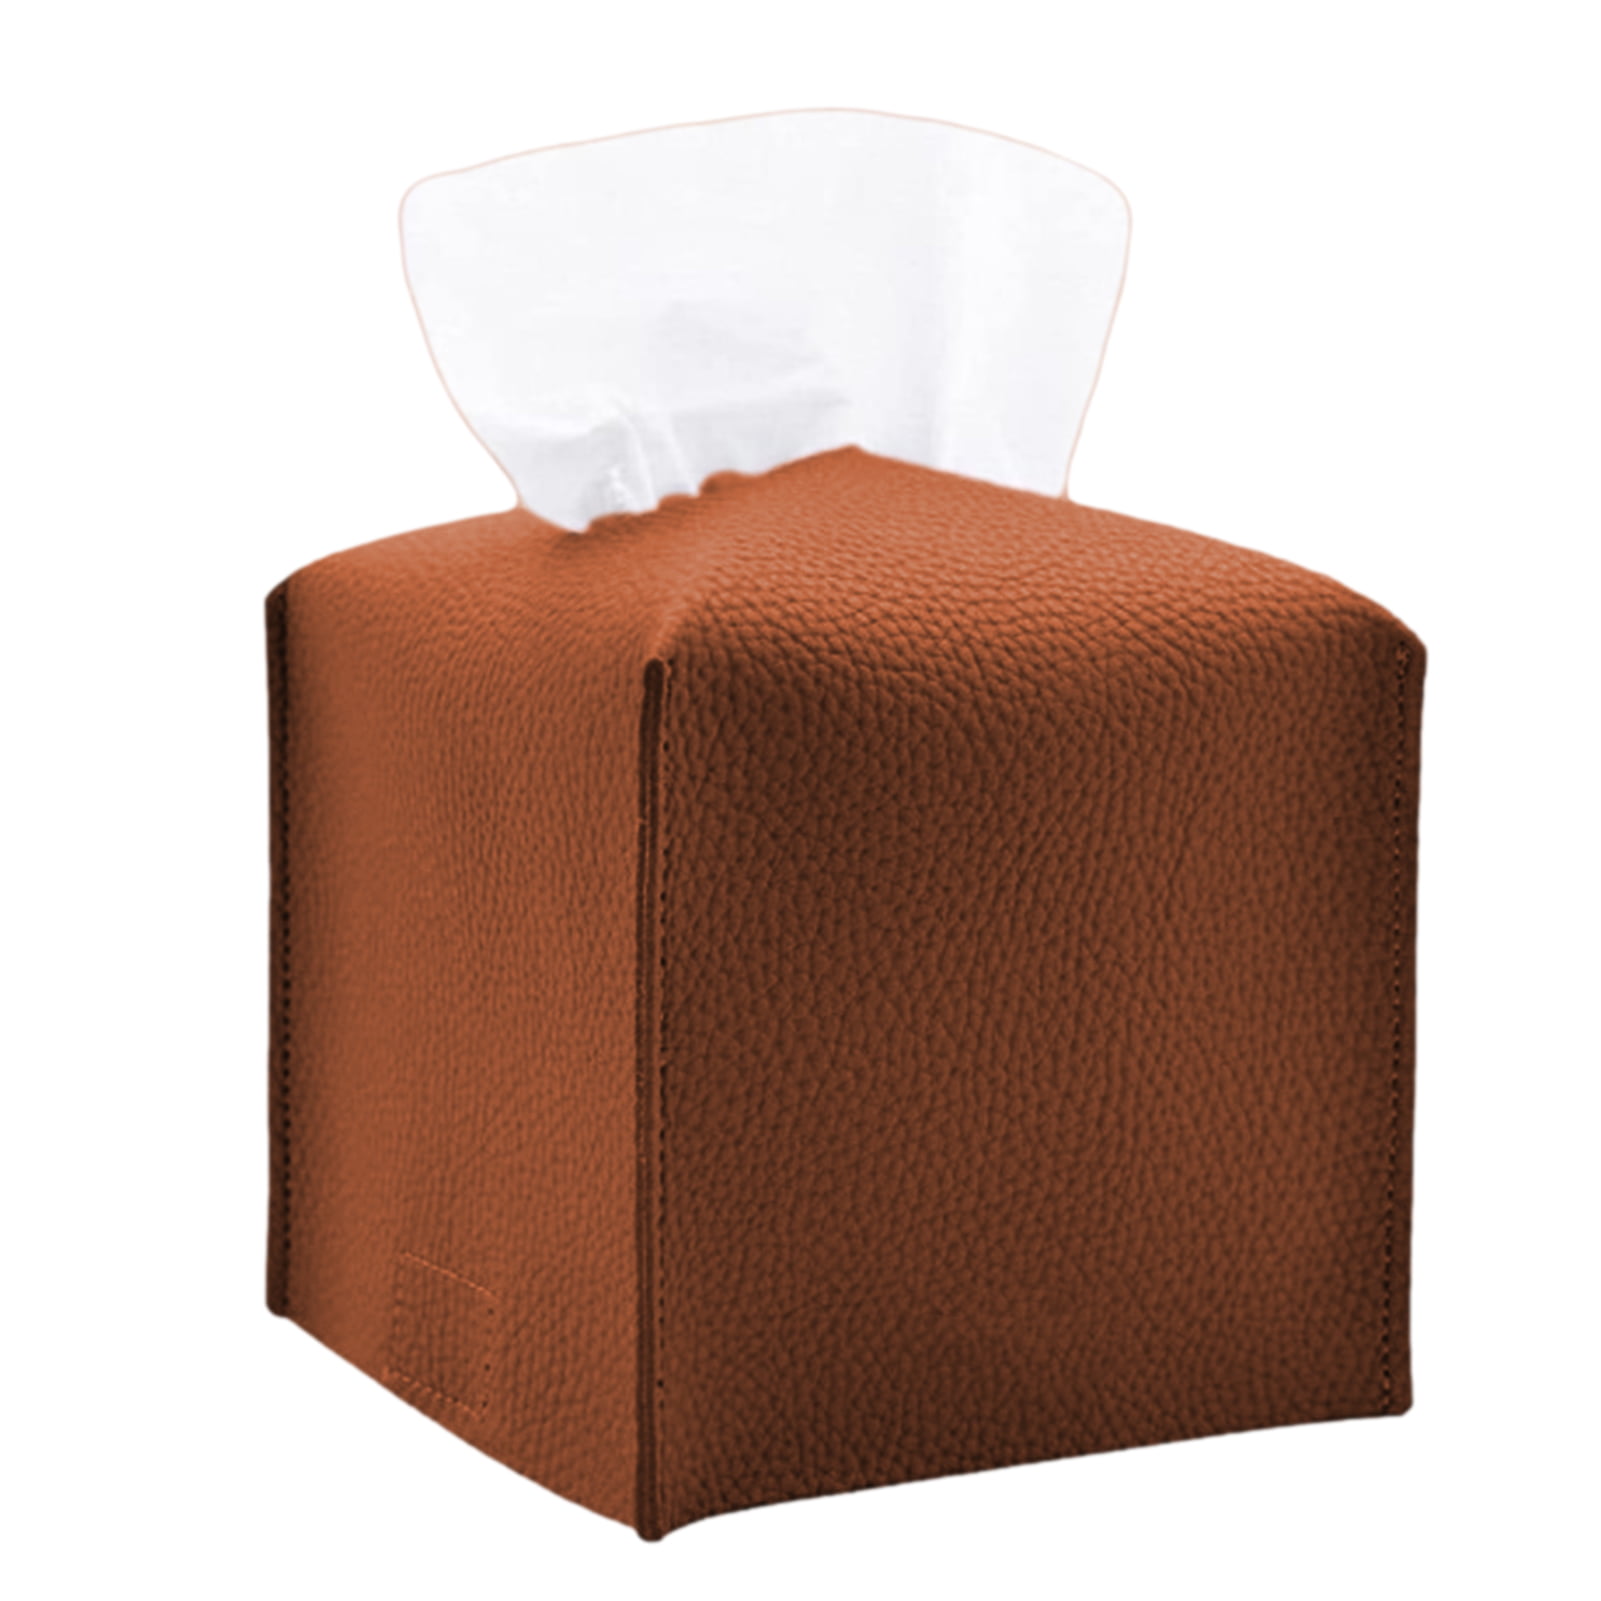 Brown Leather Car or Home use Hard Tissue Box Holder Luxury look Best quality 